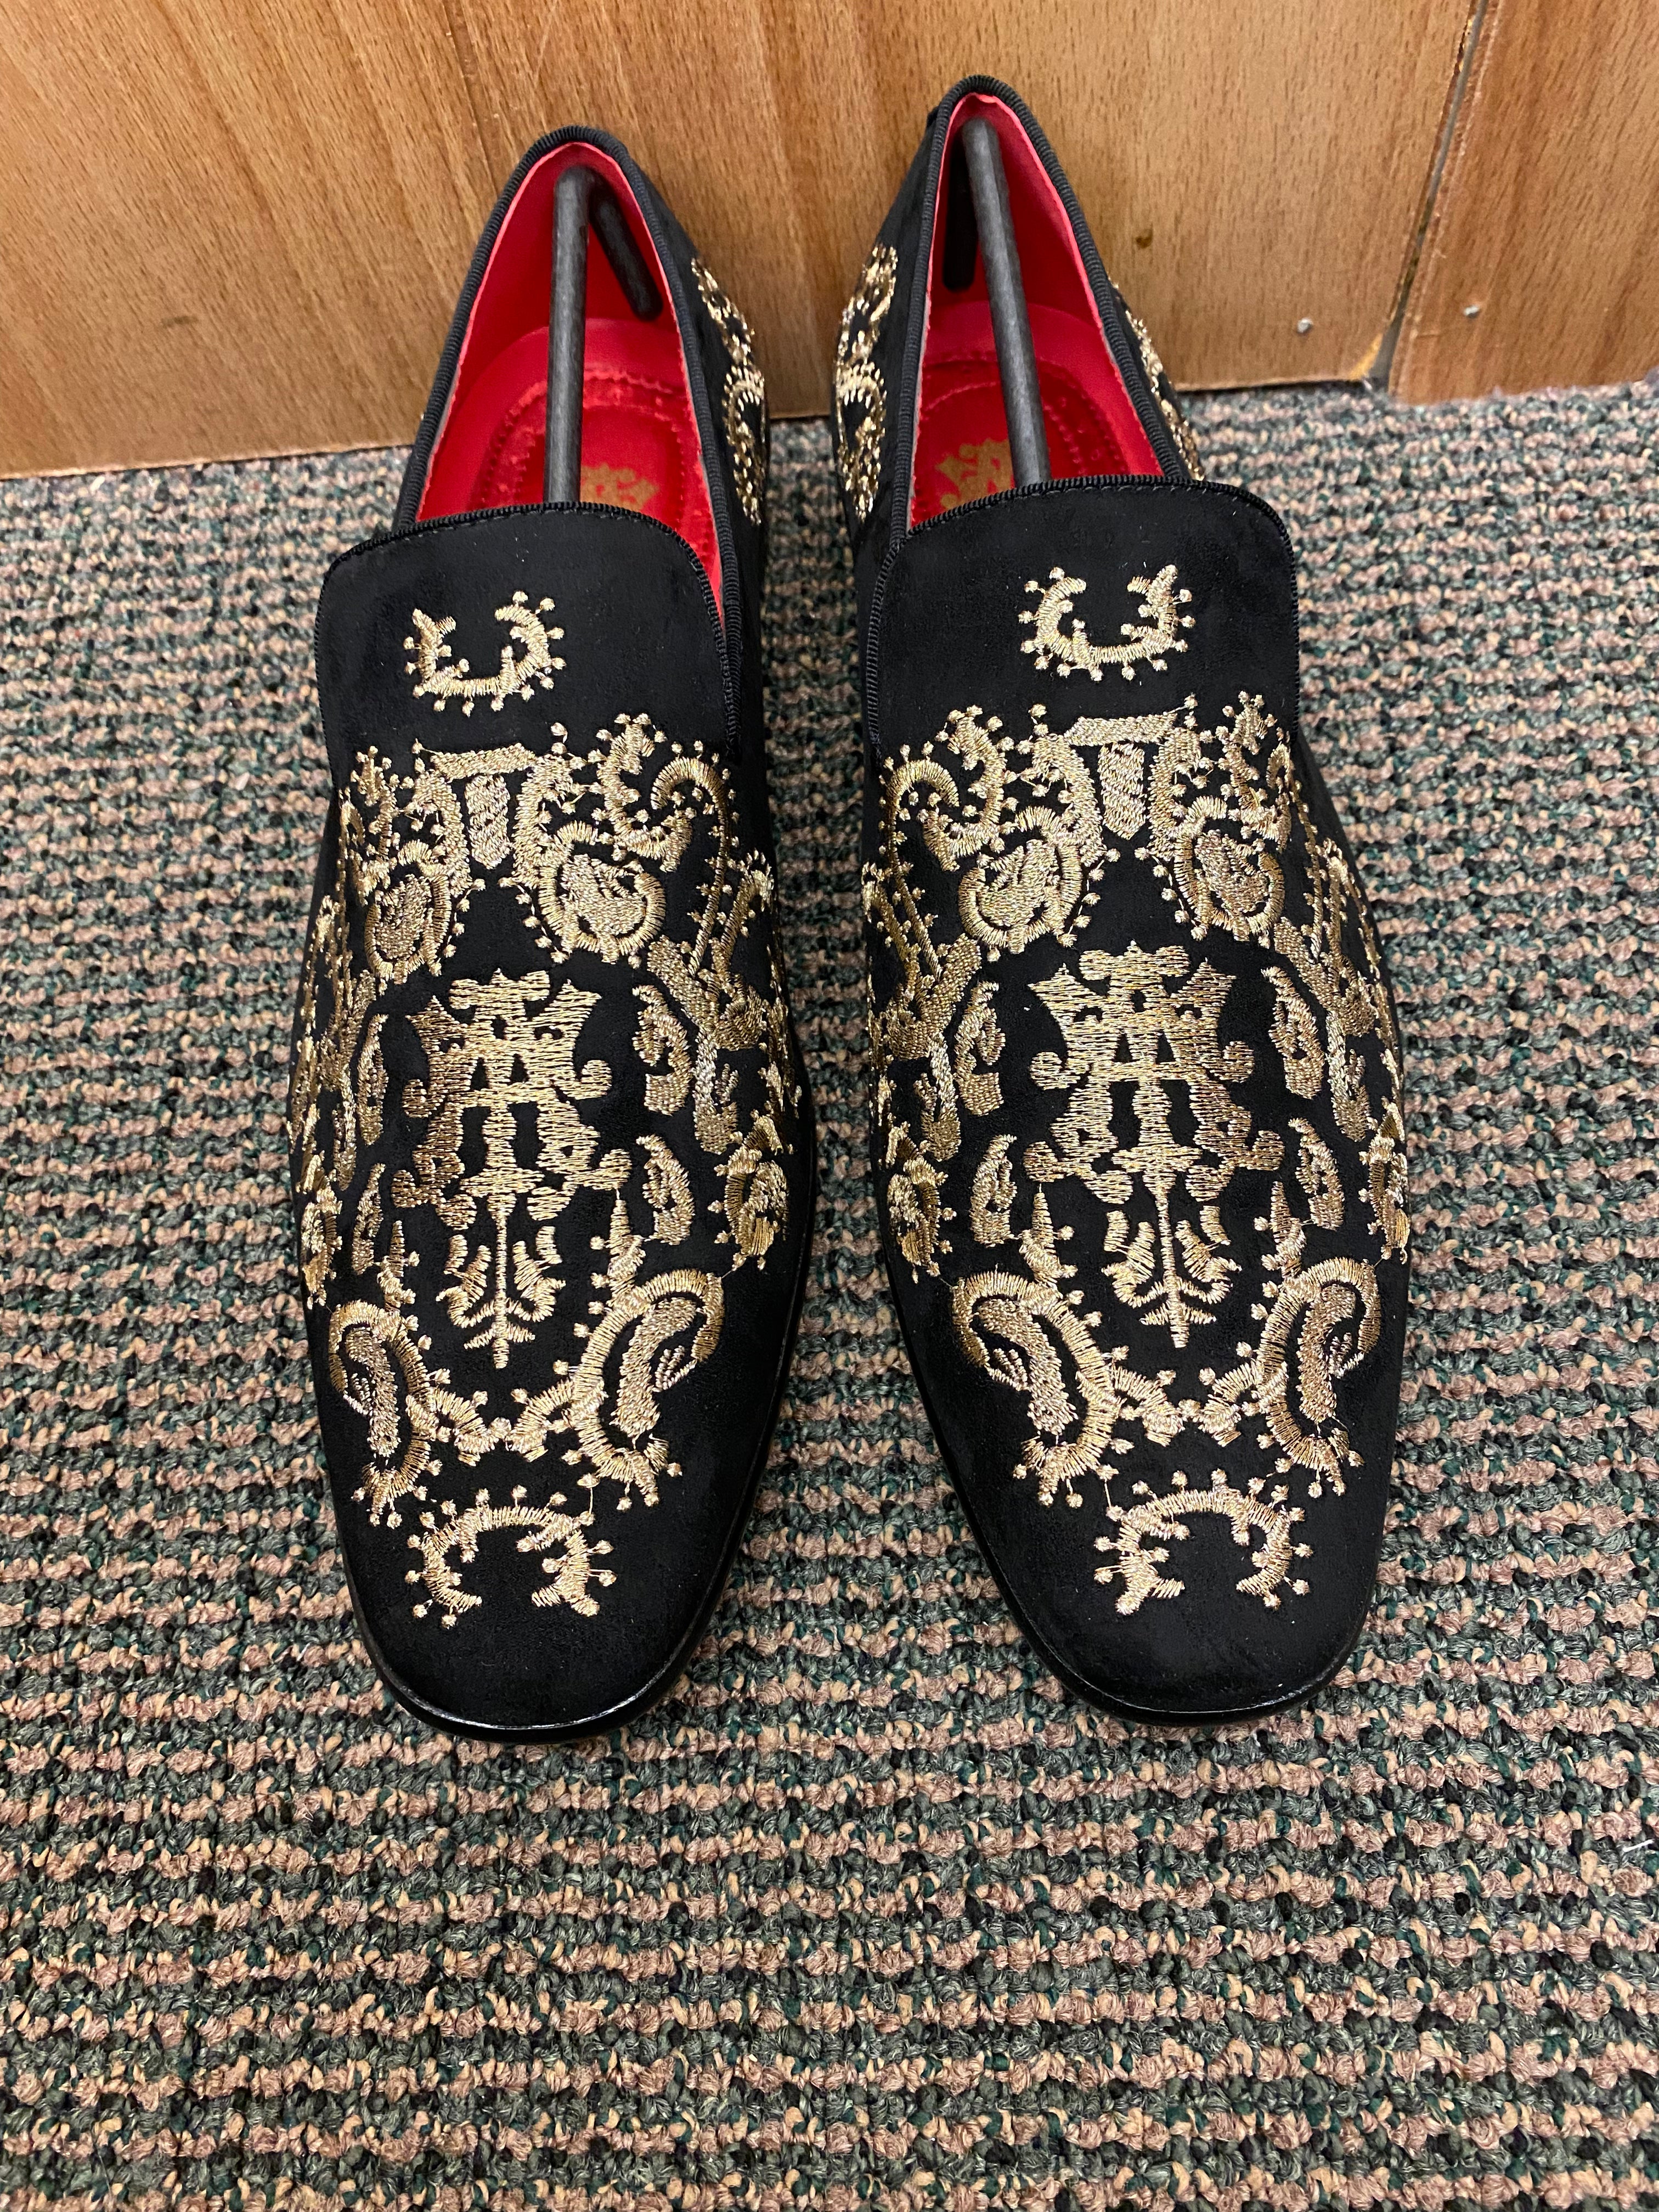 After Midnite Navy Paisley Red Bottoms Slip-on Prom Dress Shoes 8